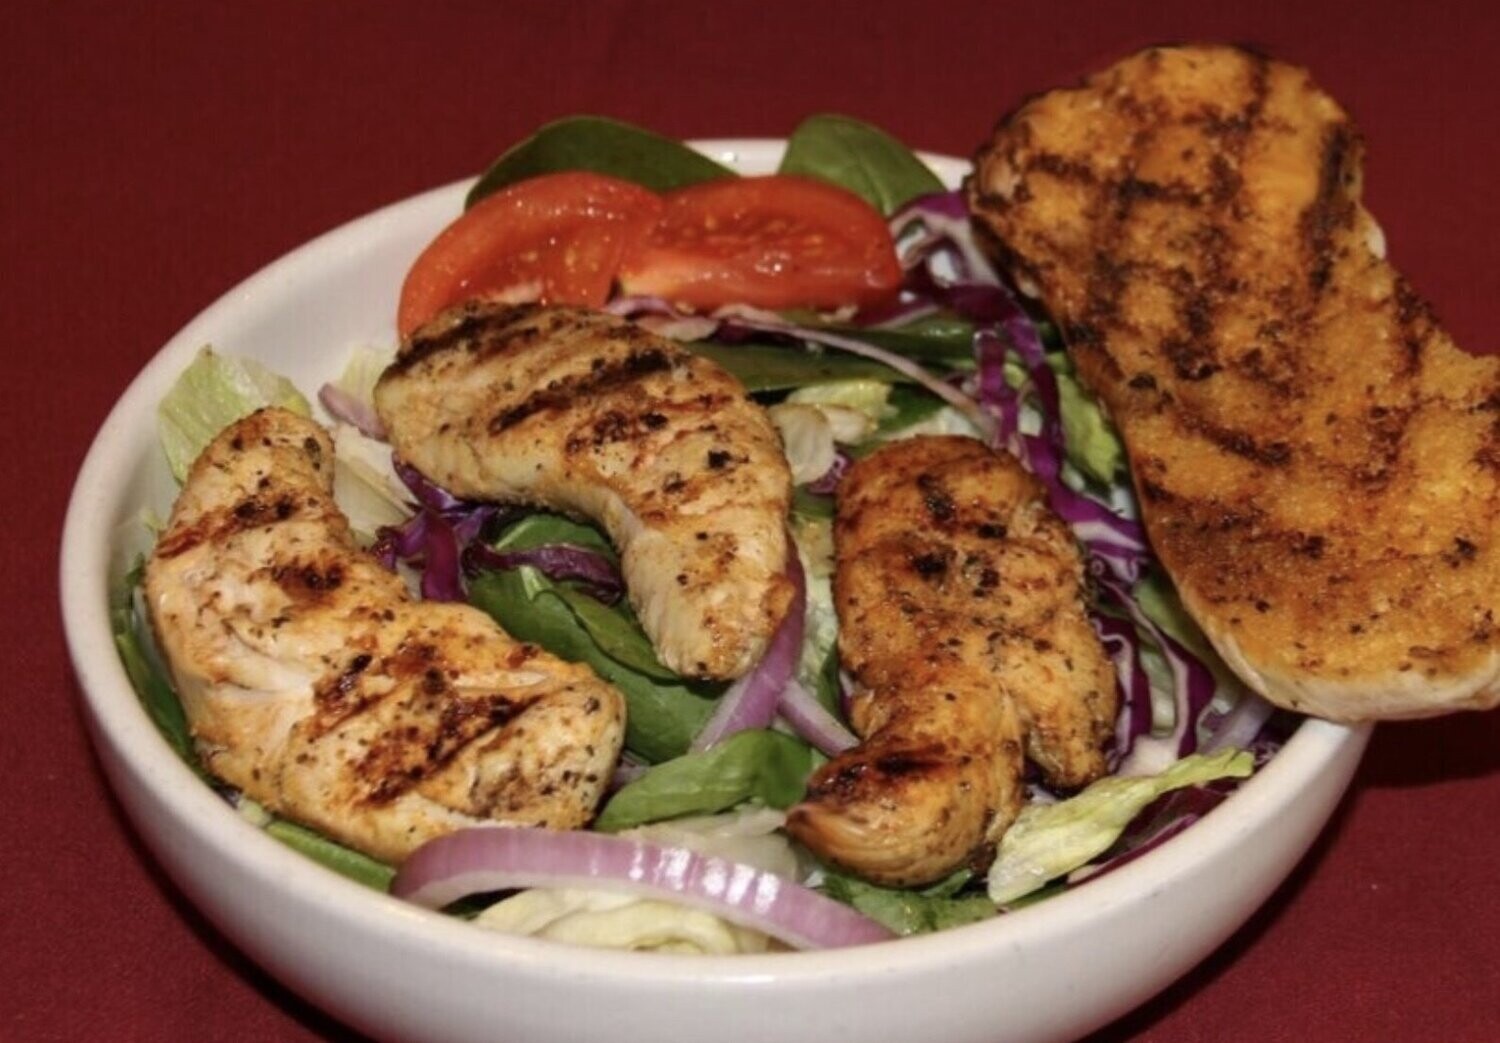 Grilled Chicken or Salmon Salad